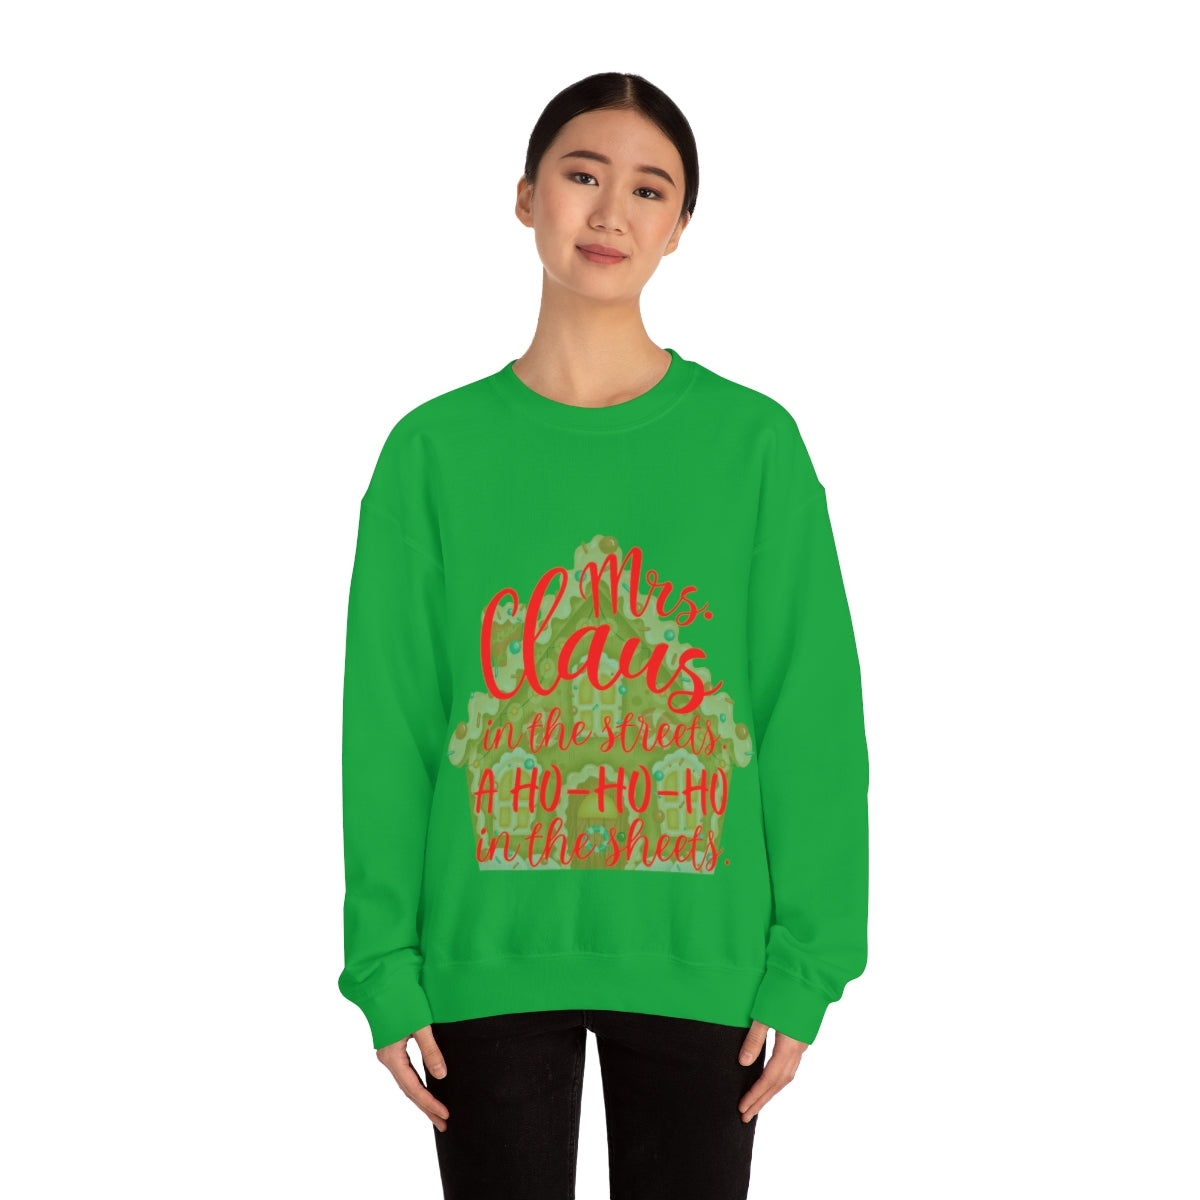 Mrs. Claus in the streets Ho Ho Ho in the sheets Unisex Heavy Blend™ Crewneck Sweatshirt